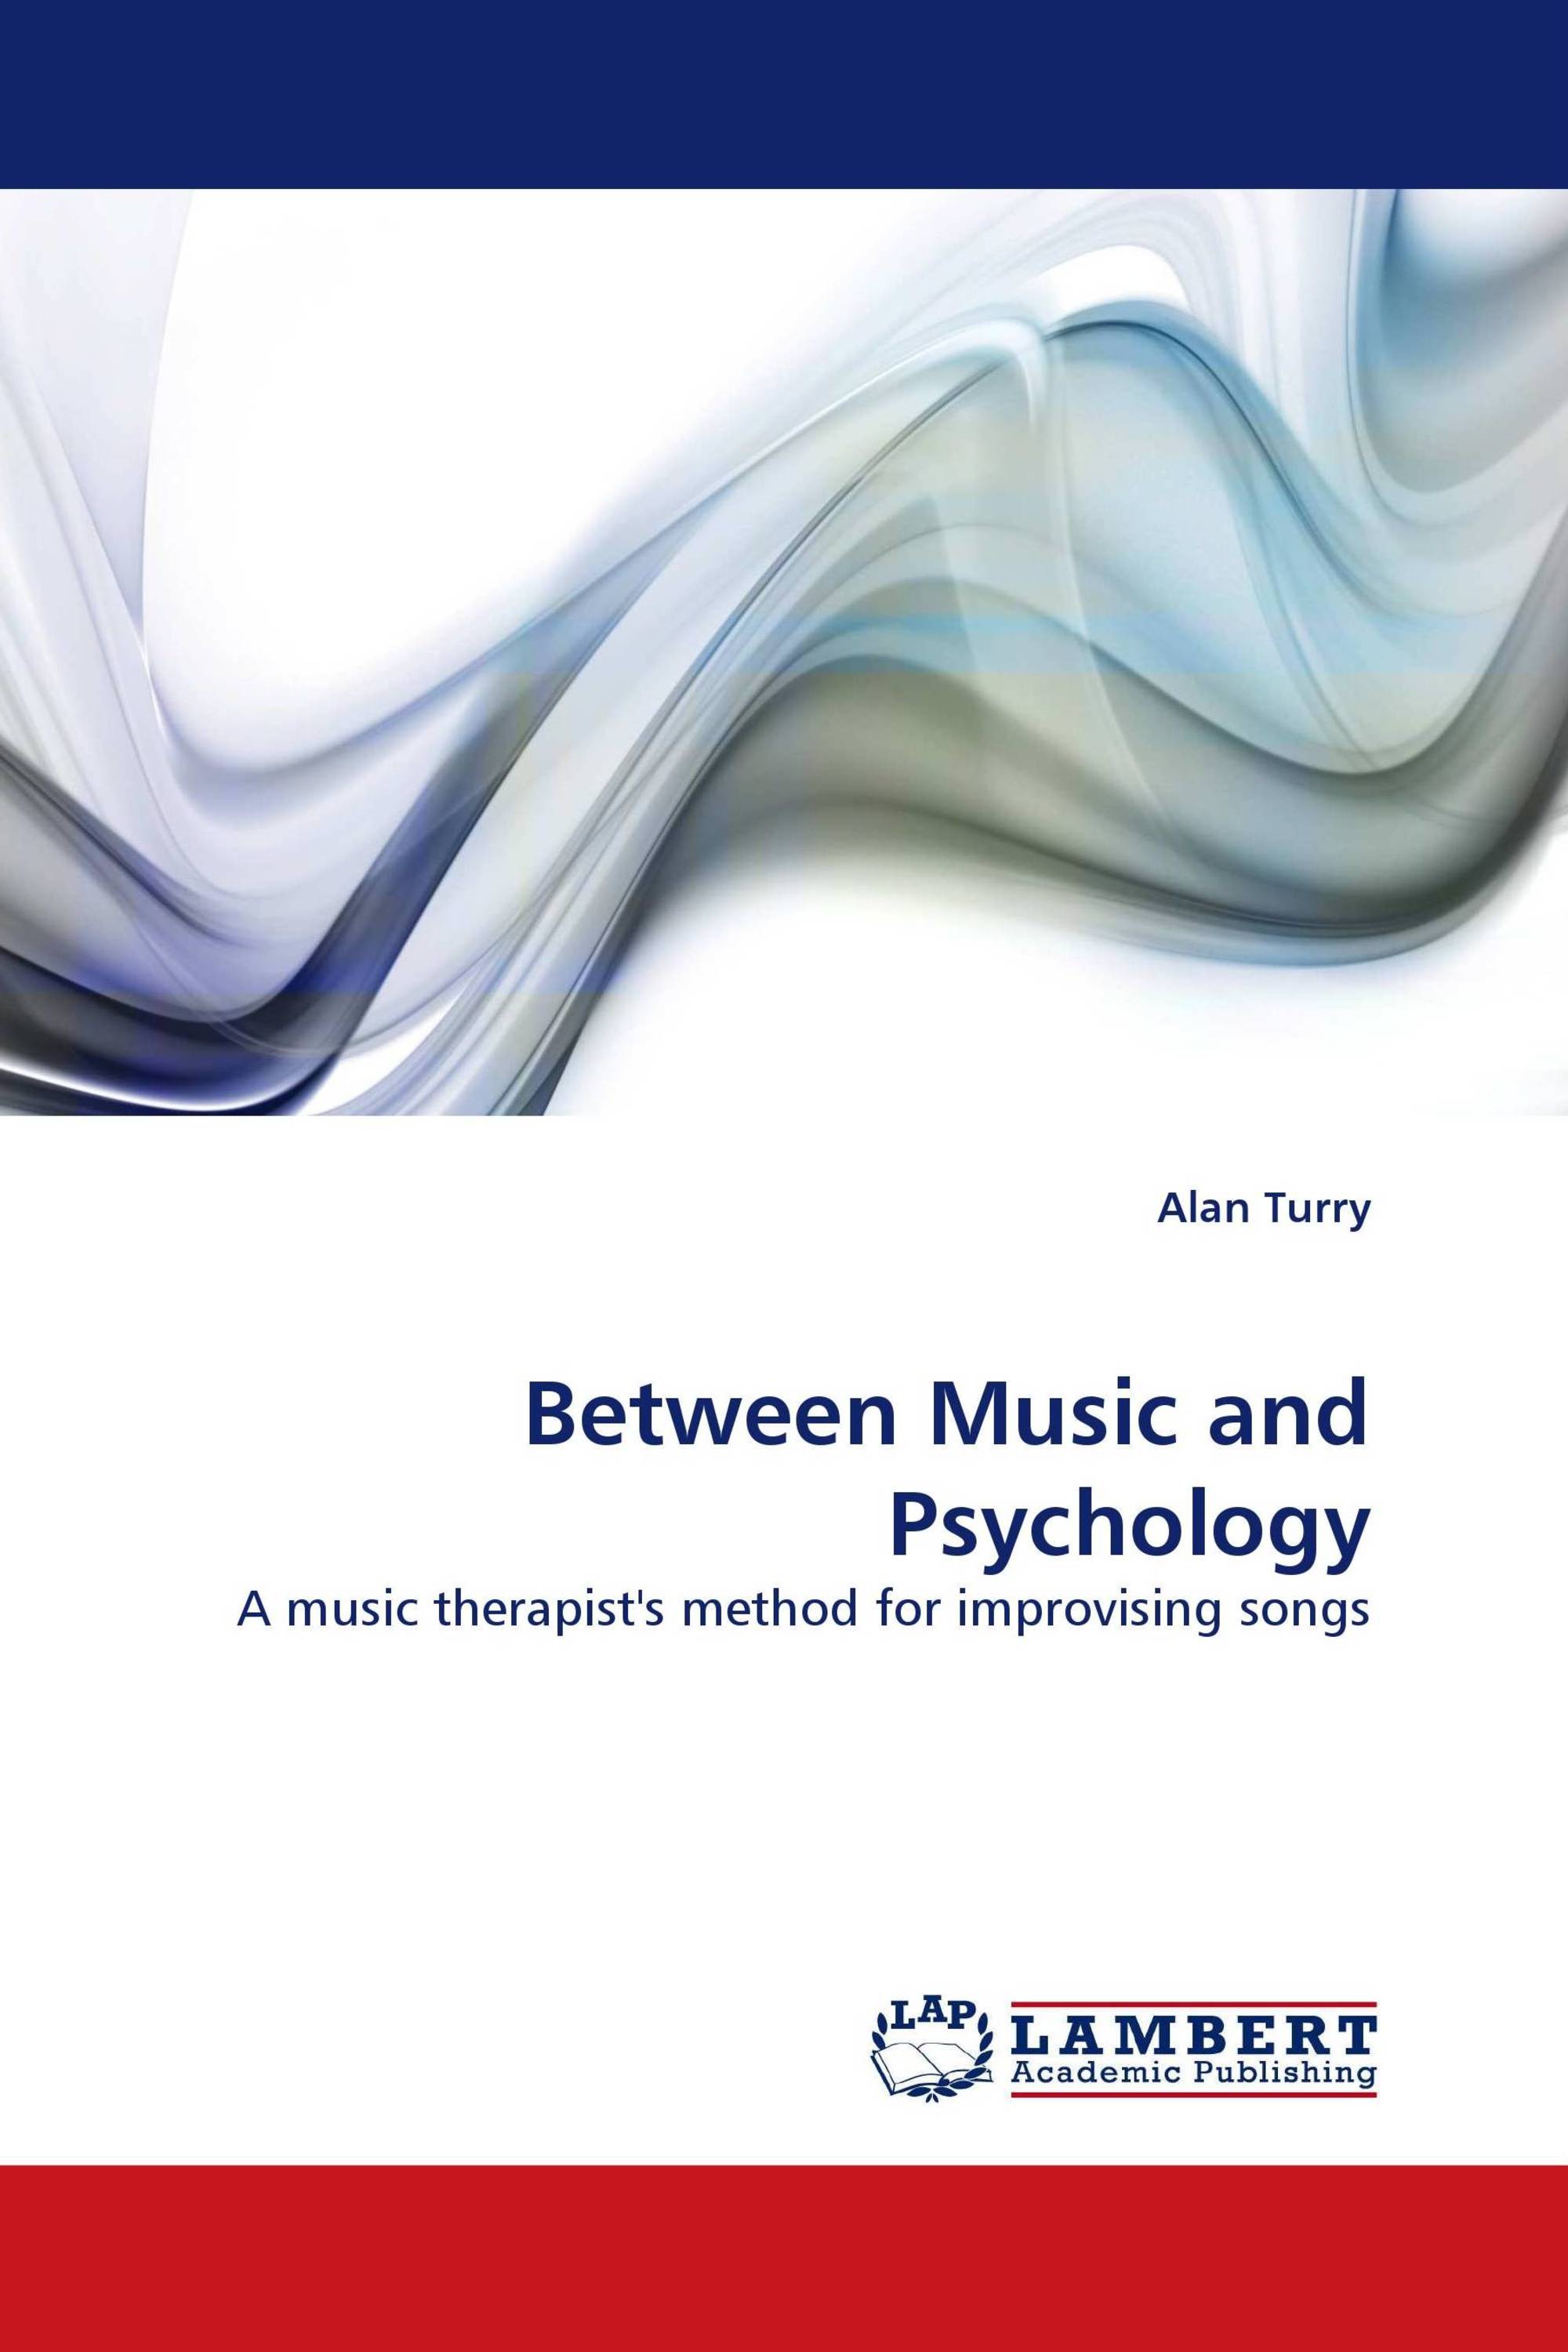 Between Music and Psychology